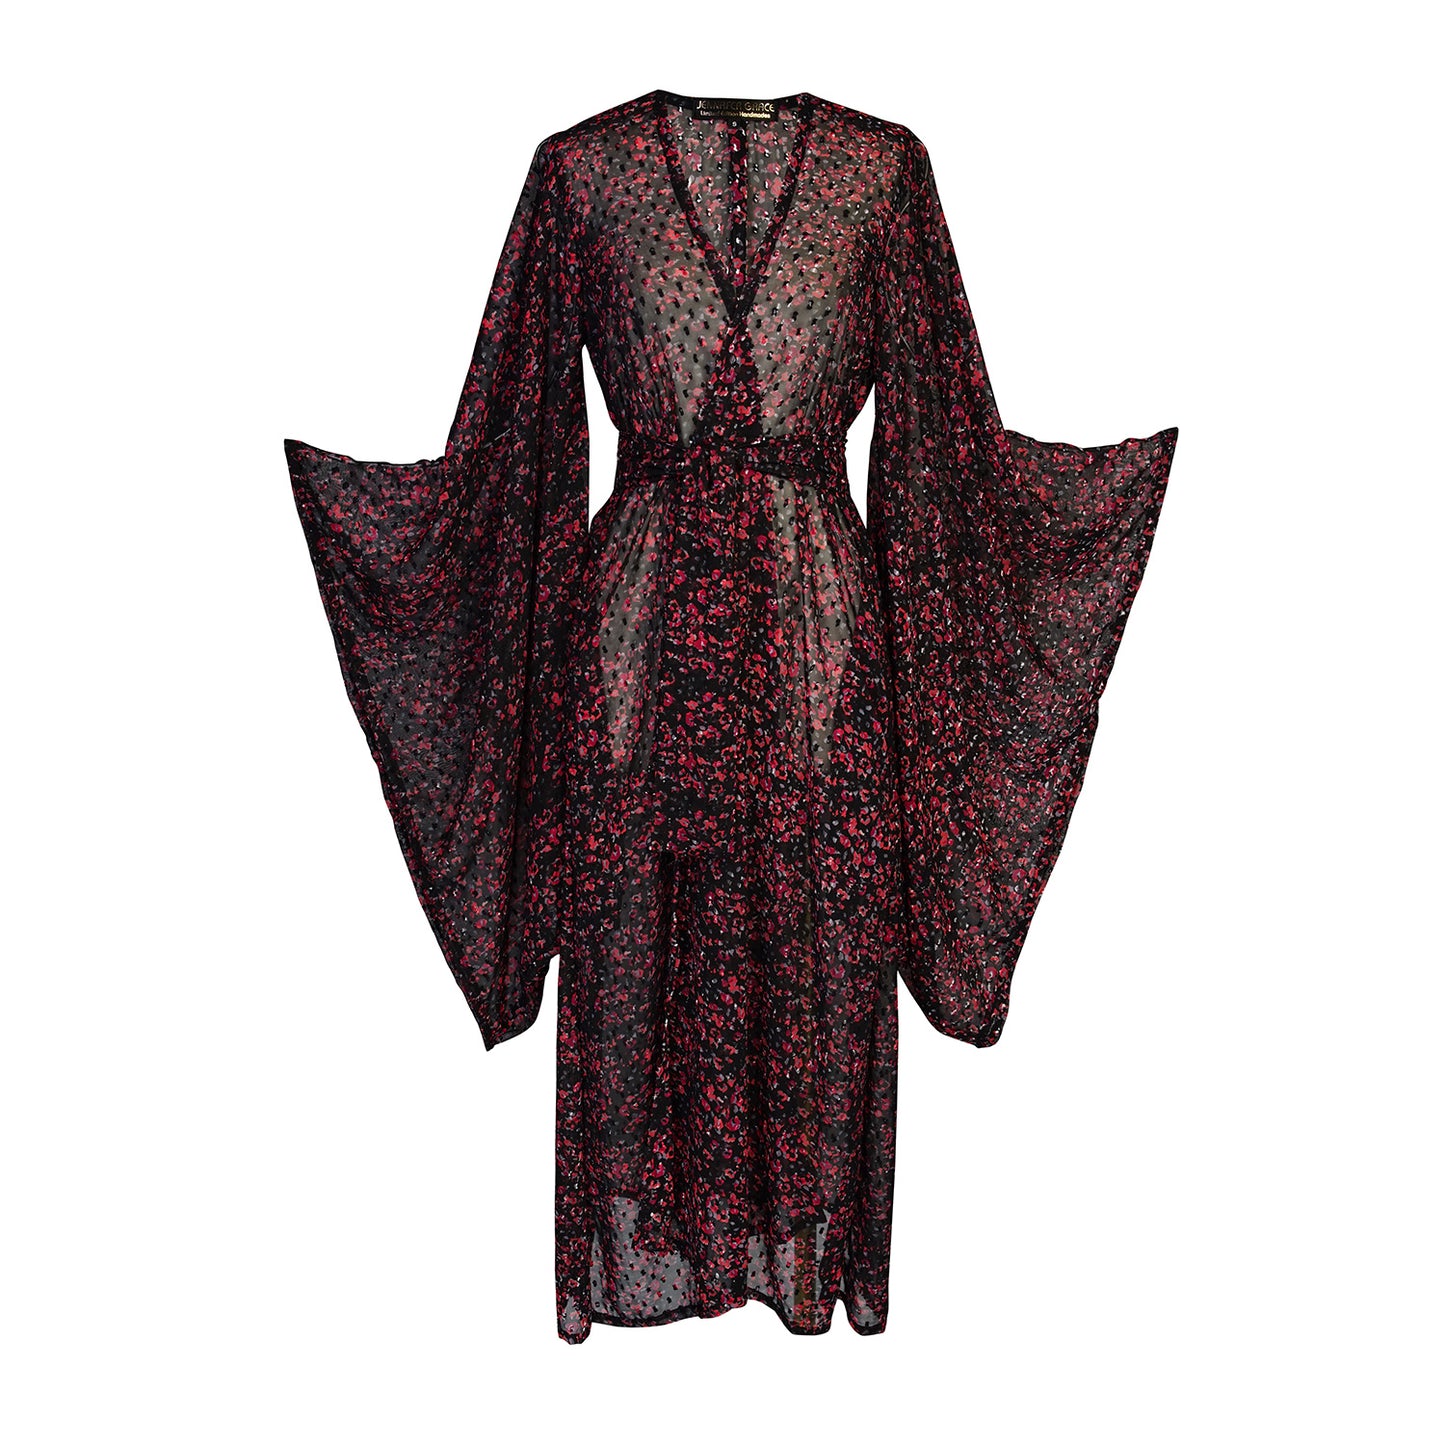 Dark red floral kimono robe with belt. Made from Swiss dot chiffon, its striking rouge floral pattern evokes a sense of mystery. Can be worn open as a robe or wrap dress. Long flowy sleeves with ankle hem.Dark red floral kimono robe with belt. Made from Swiss dot chiffon, its striking rouge floral pattern evokes a sense of mystery. Can be worn open as a robe or wrap dress. Long flowy sleeves with ankle hem.